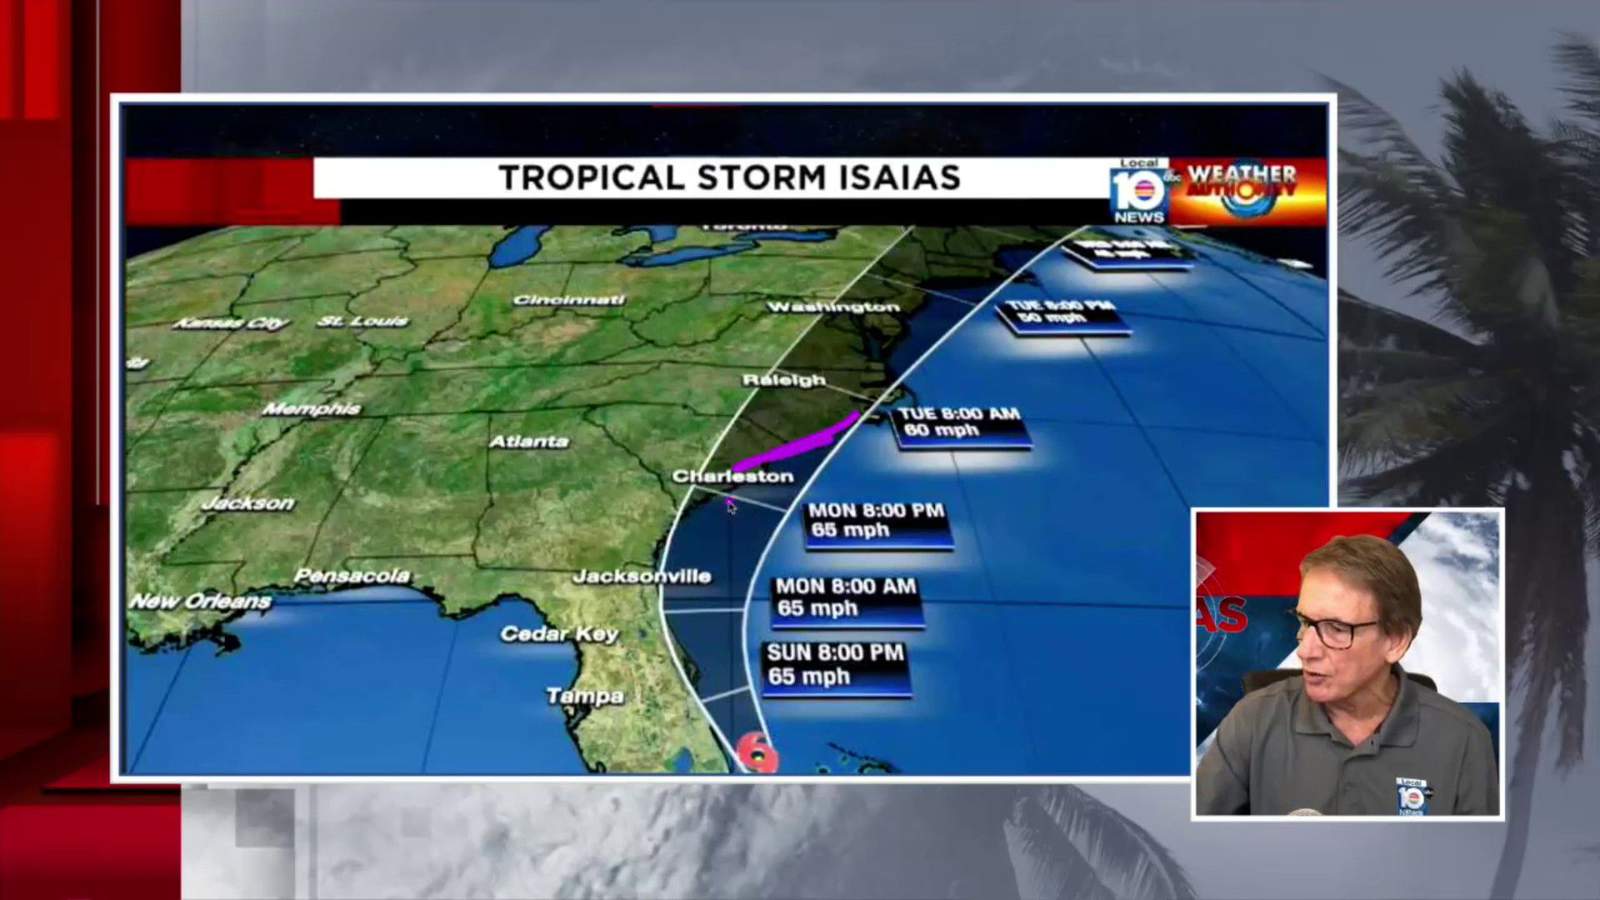 Norcross: Florida coast spared as Tropical Storm Isaias moves north